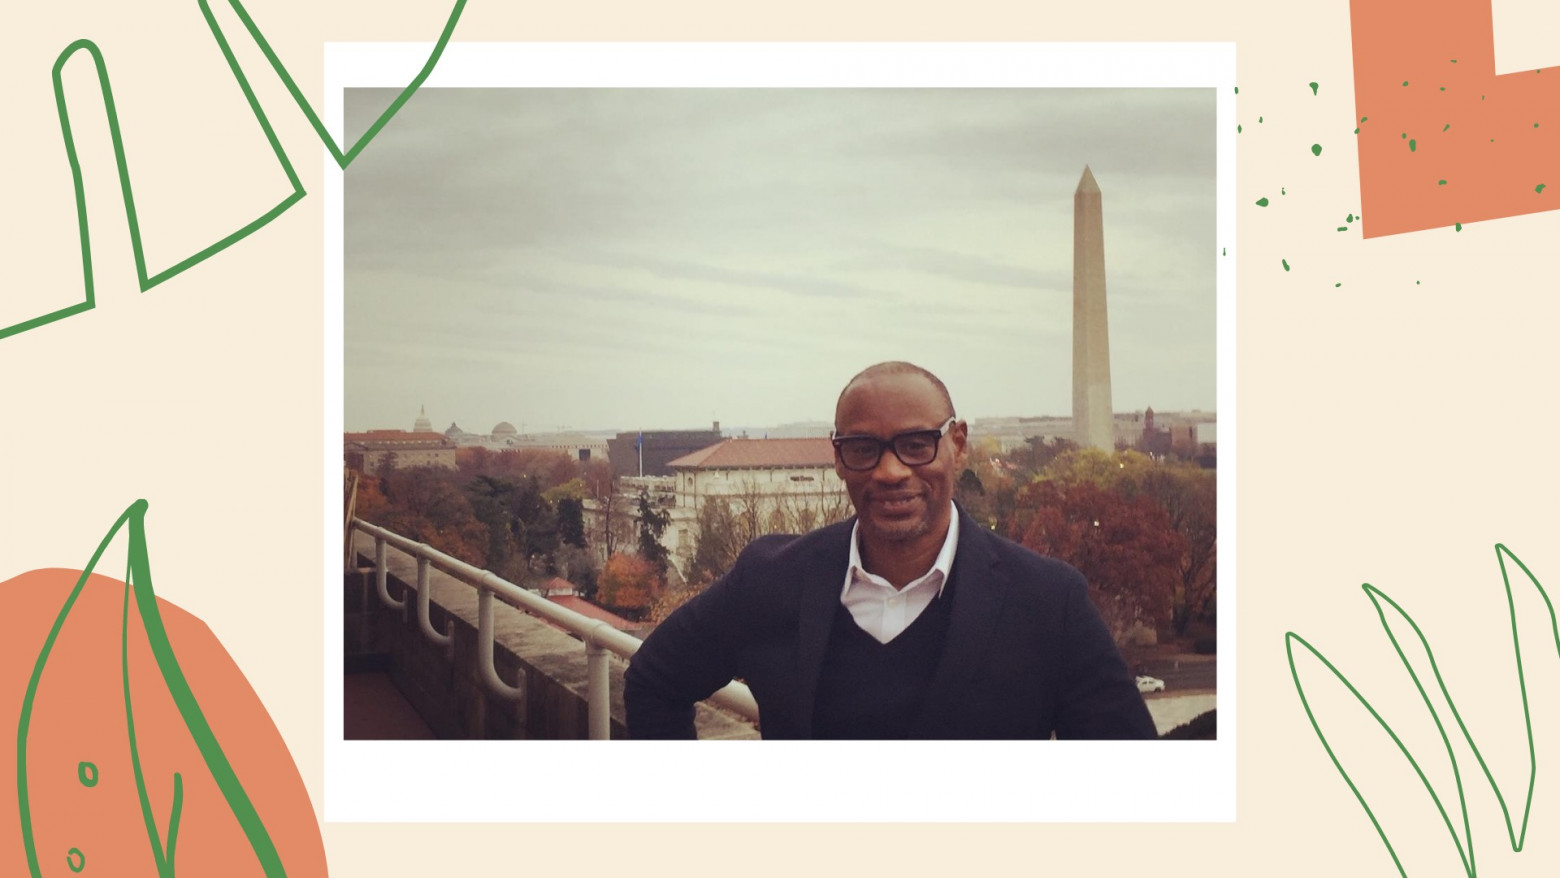 Expert Q&A: The Washington Post’s Darryl Fears on covering the environment and his experience as a journalist of color